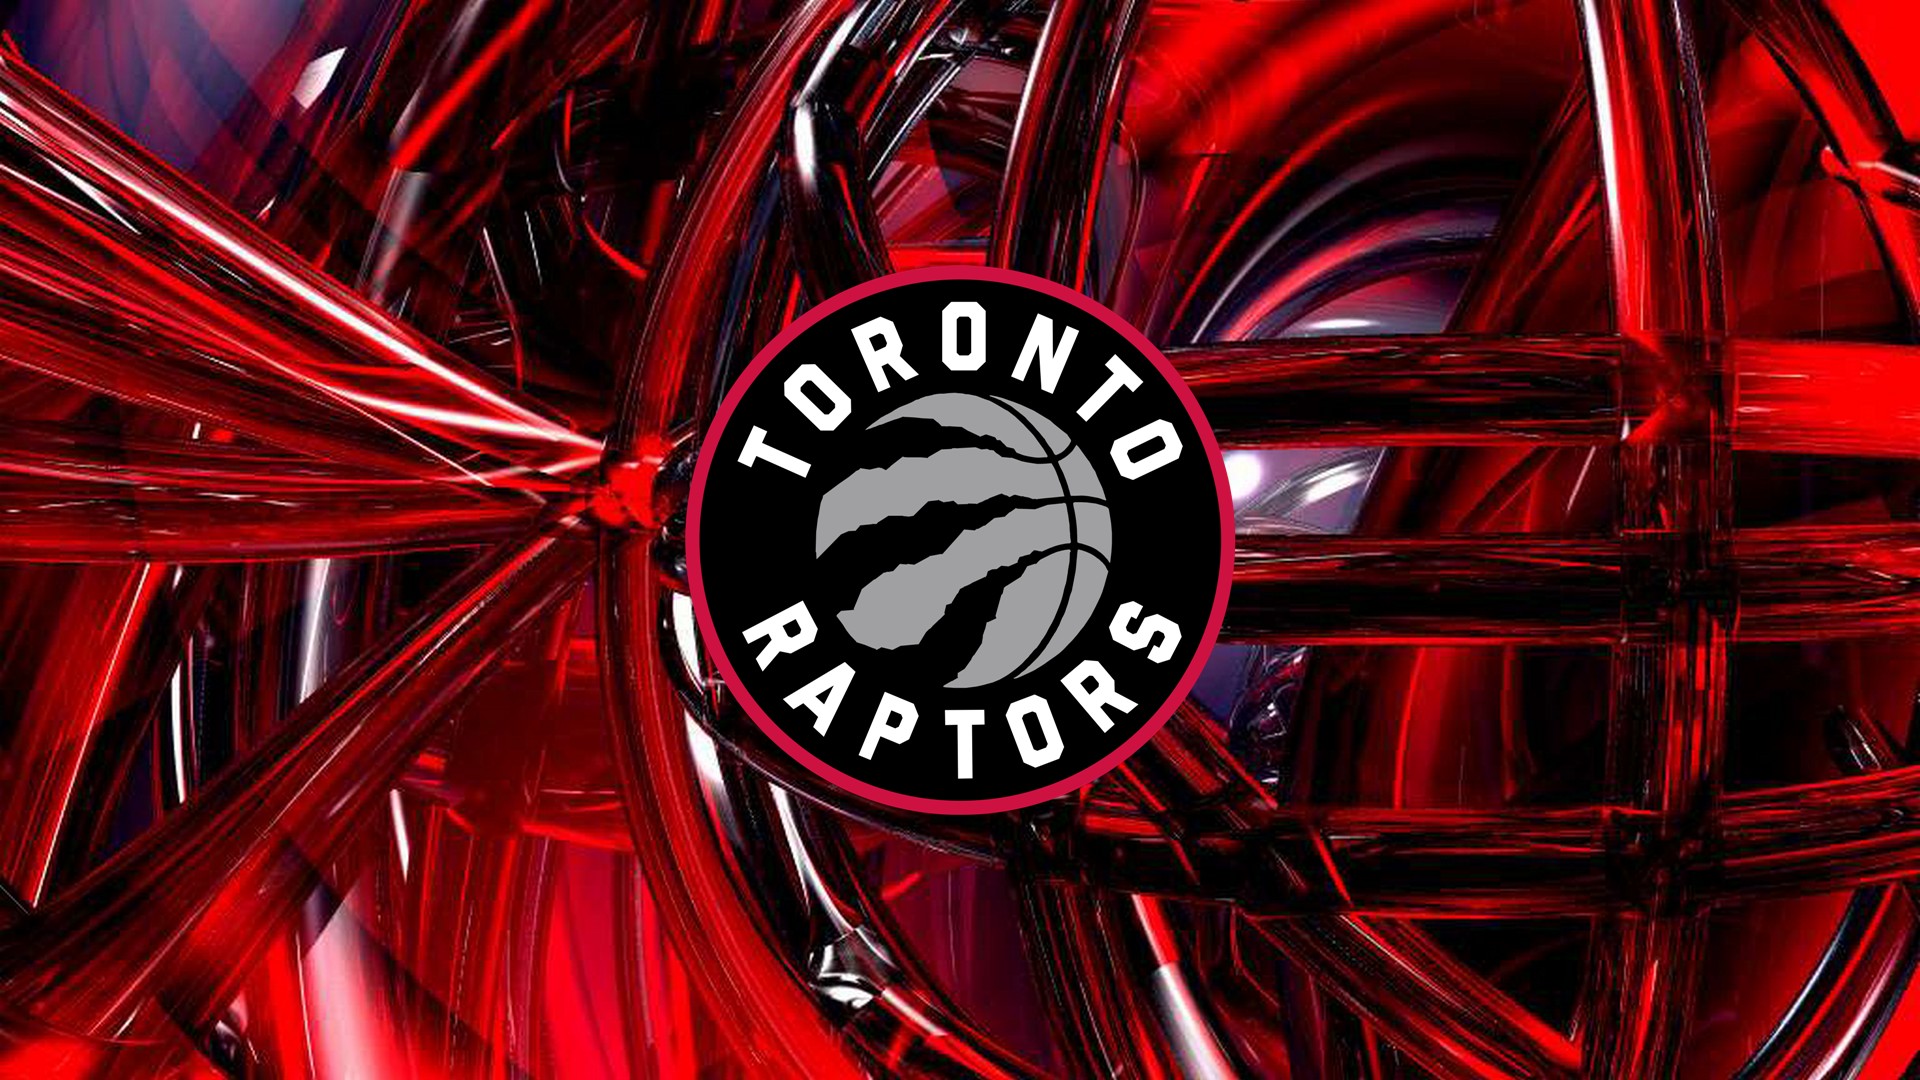 Toronto Raptors Logo HD Wallpapers with high-resolution 1920x1080 pixel. You can use this wallpaper for your Desktop Computer Backgrounds, Windows or Mac Screensavers, iPhone Lock screen, Tablet or Android and another Mobile Phone device